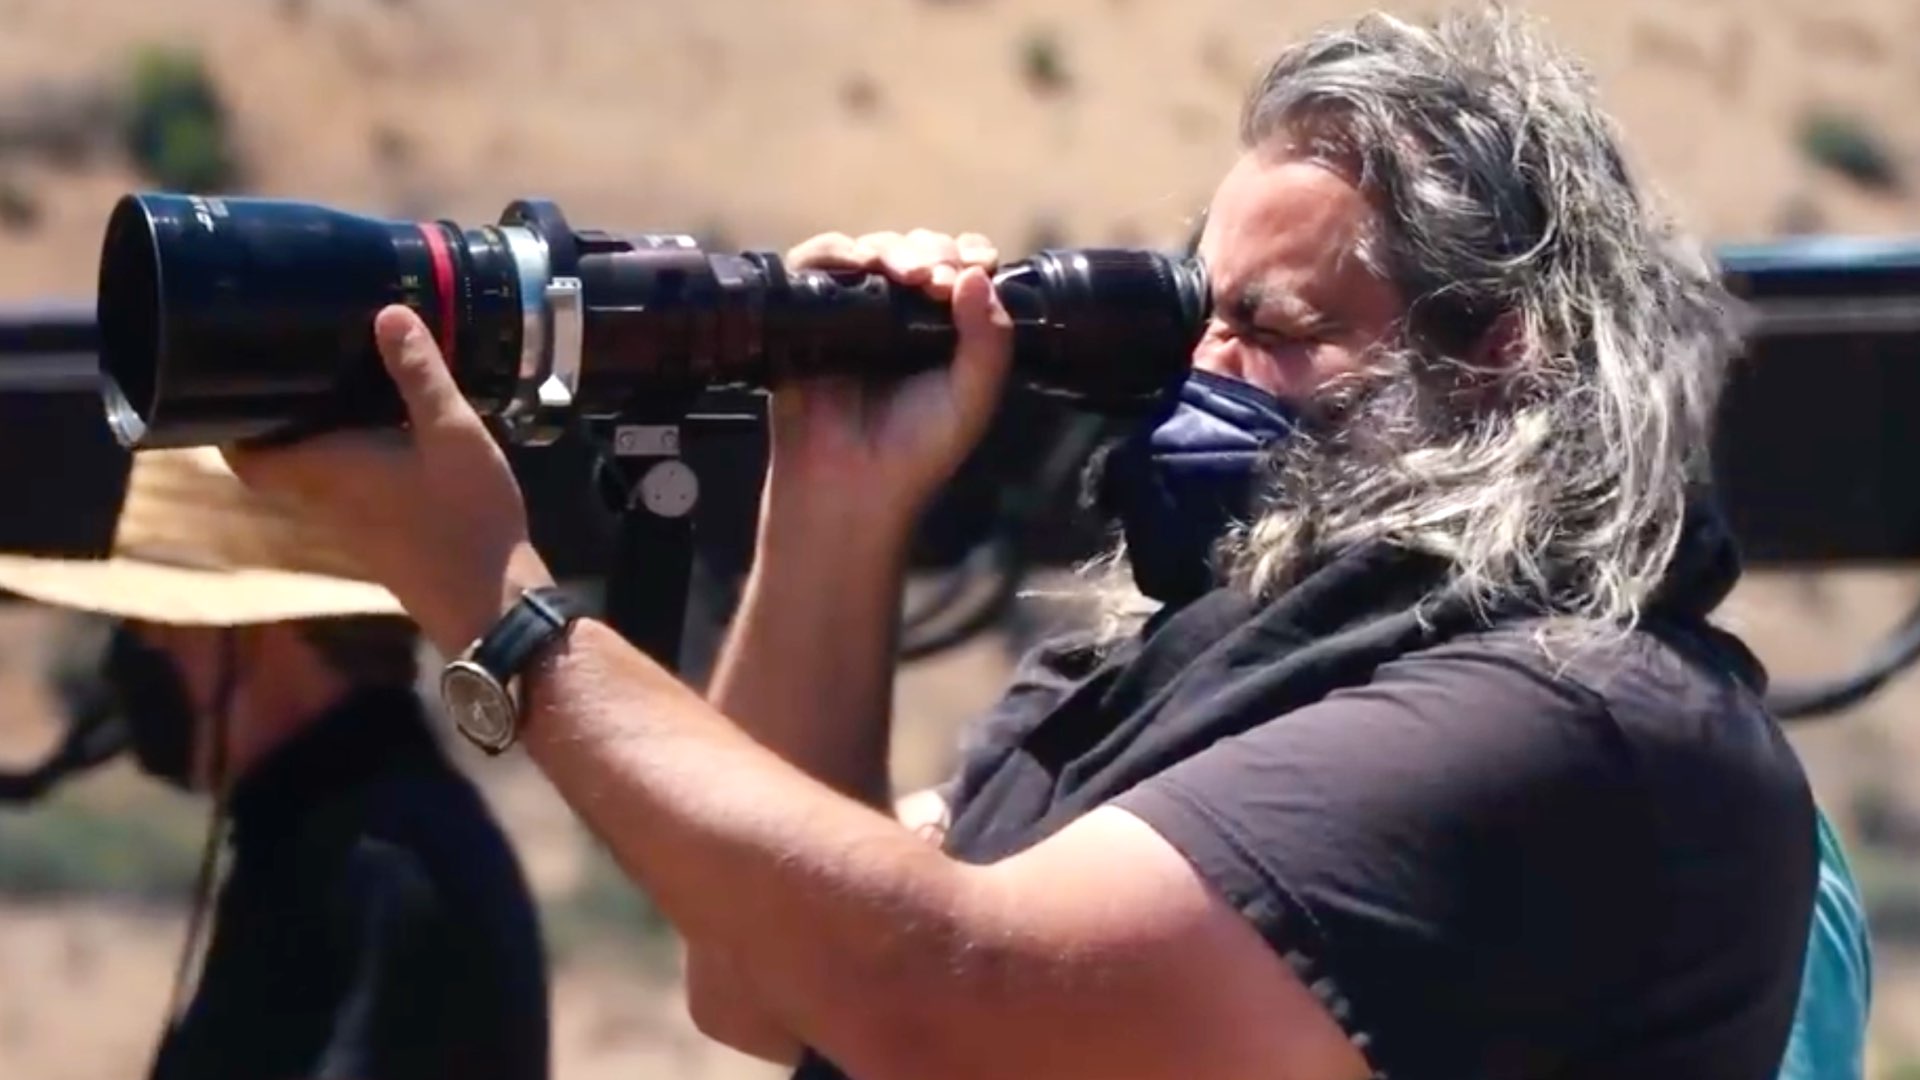 Hoytema: “In NOPE we did very extreme and crazy things with IMAX cameras”